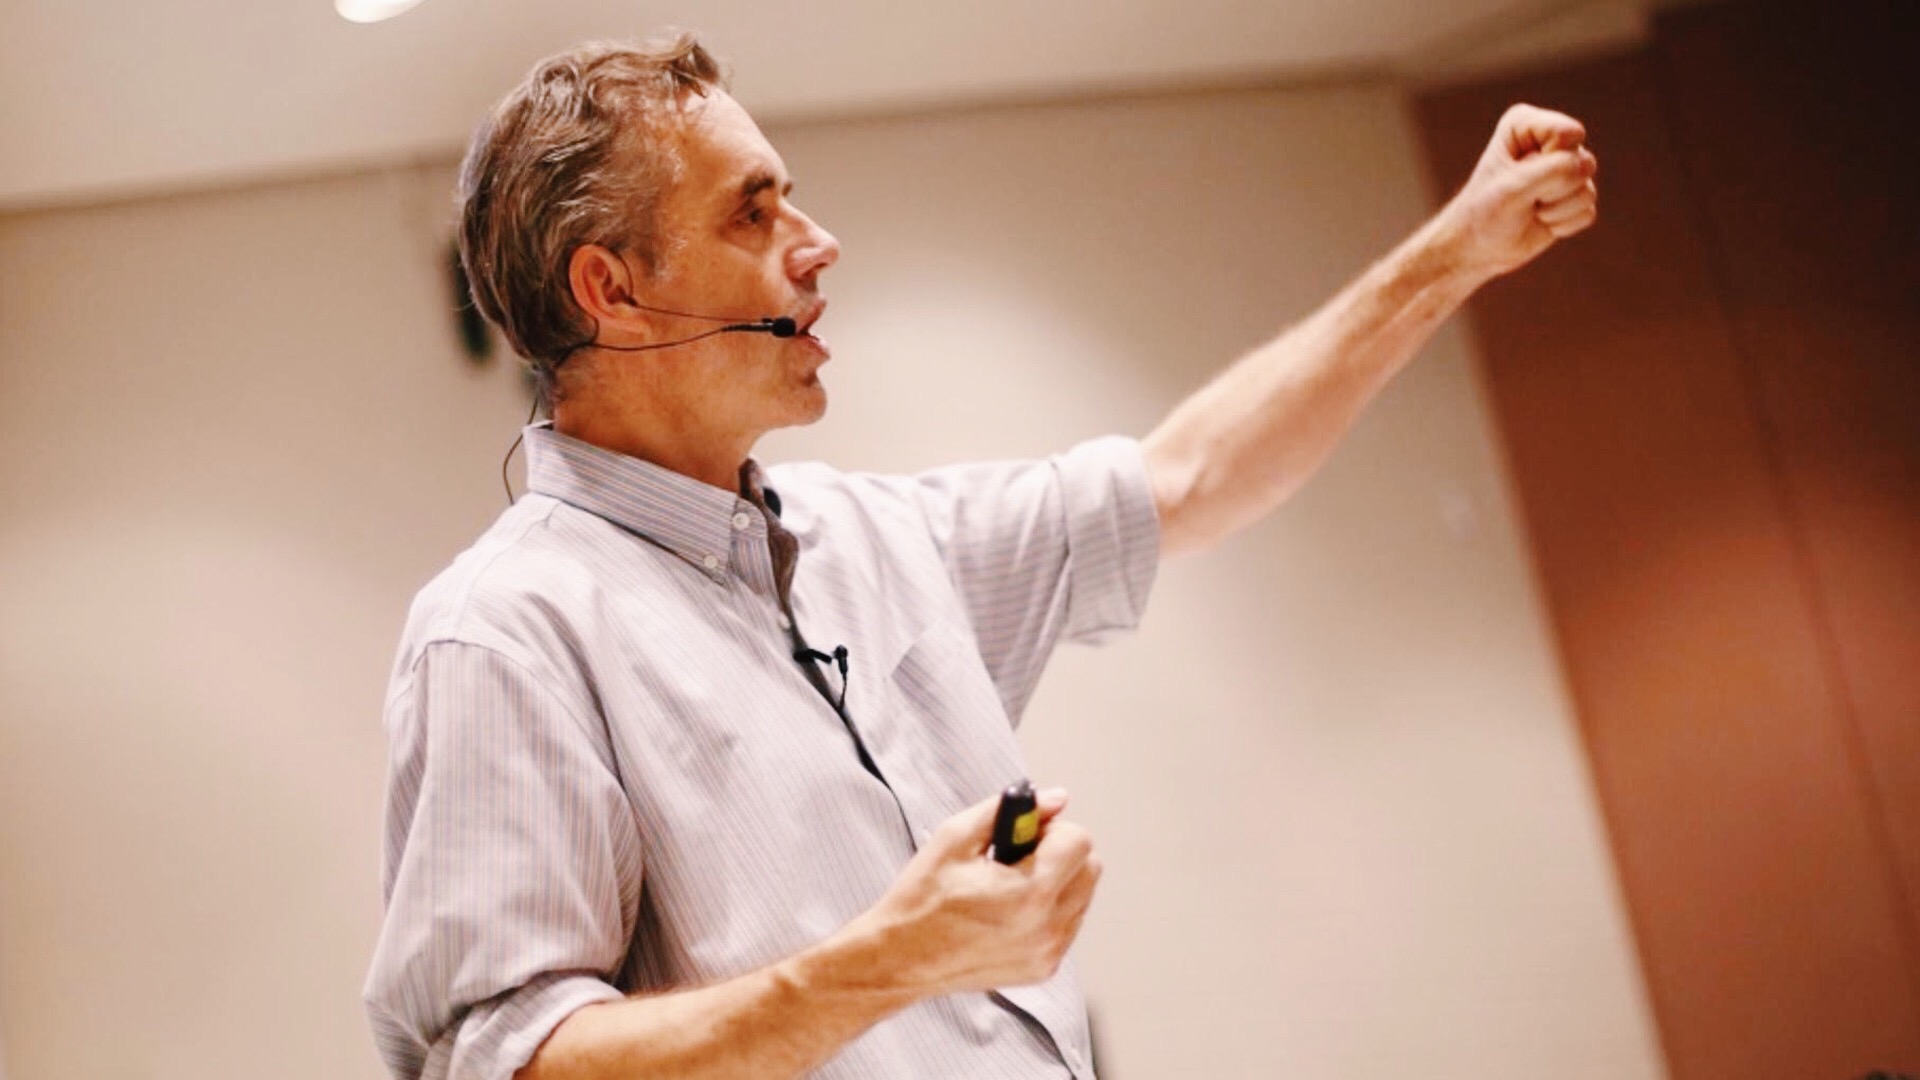 Jordan Peterson's 9-Step Guide to Public Speaking Is Better Than Any You Could Find - Valdour